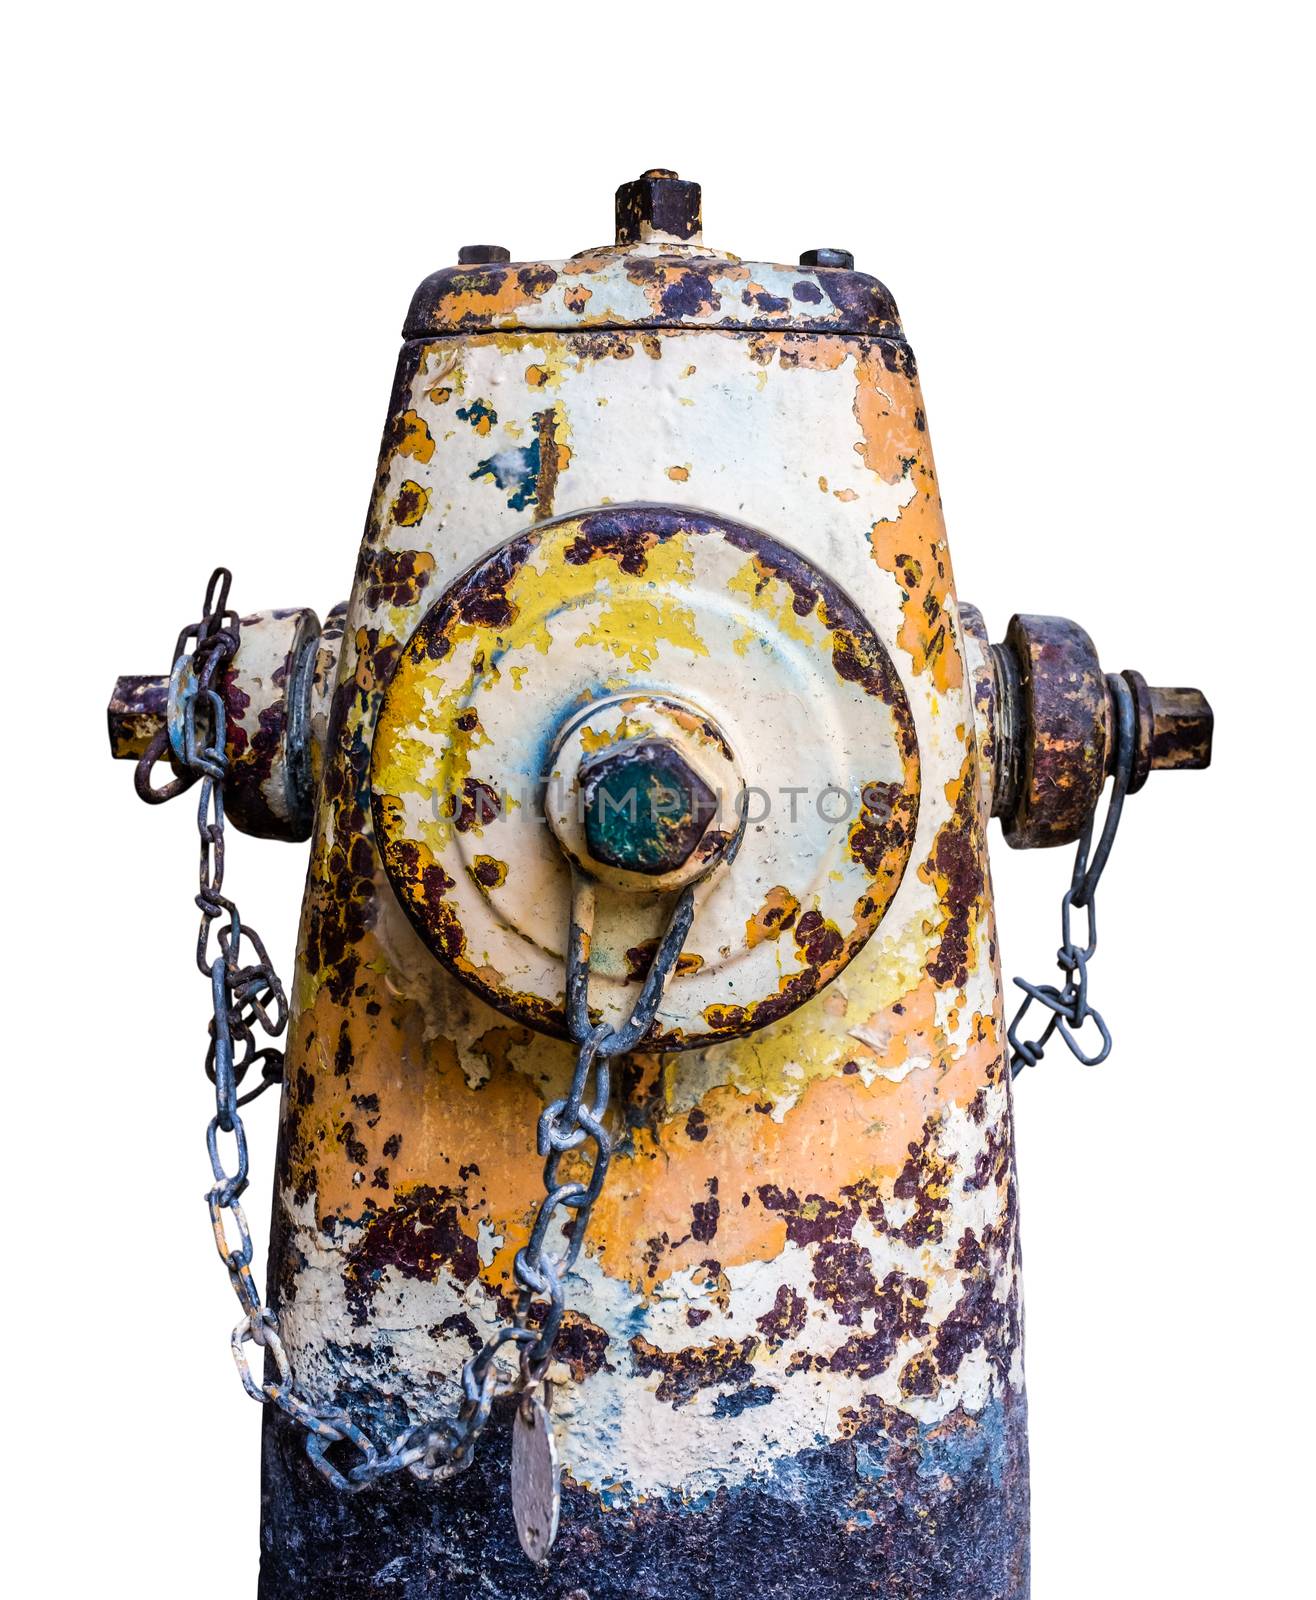 Grungy Isolated Old Fire Hydrant by mrdoomits